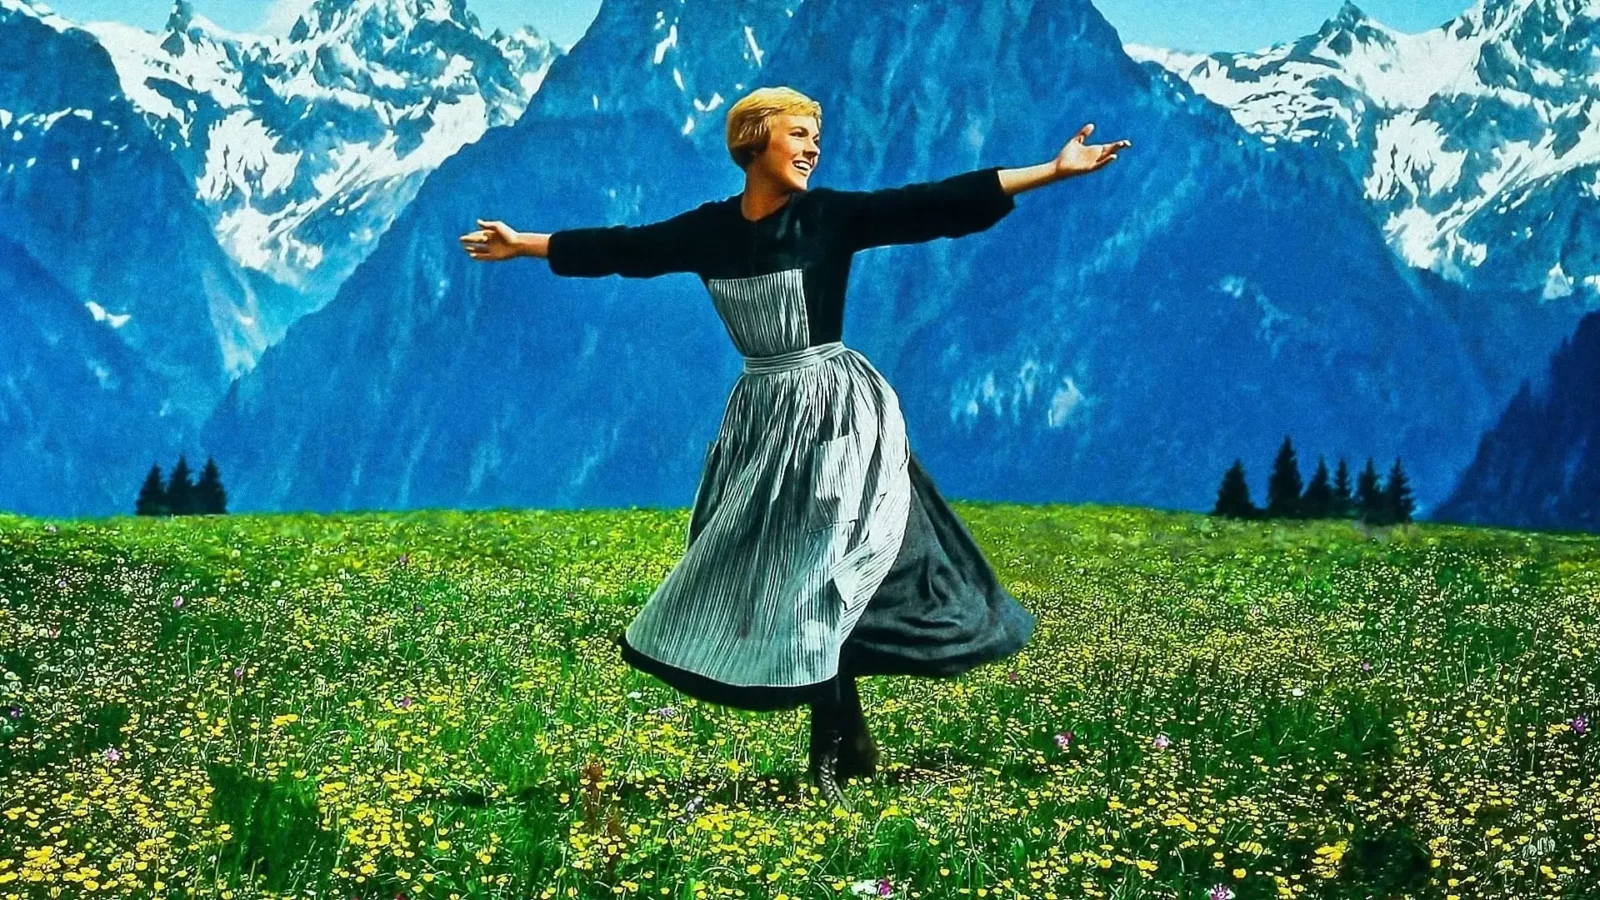 Movies By Country Quiz The Sound of Music